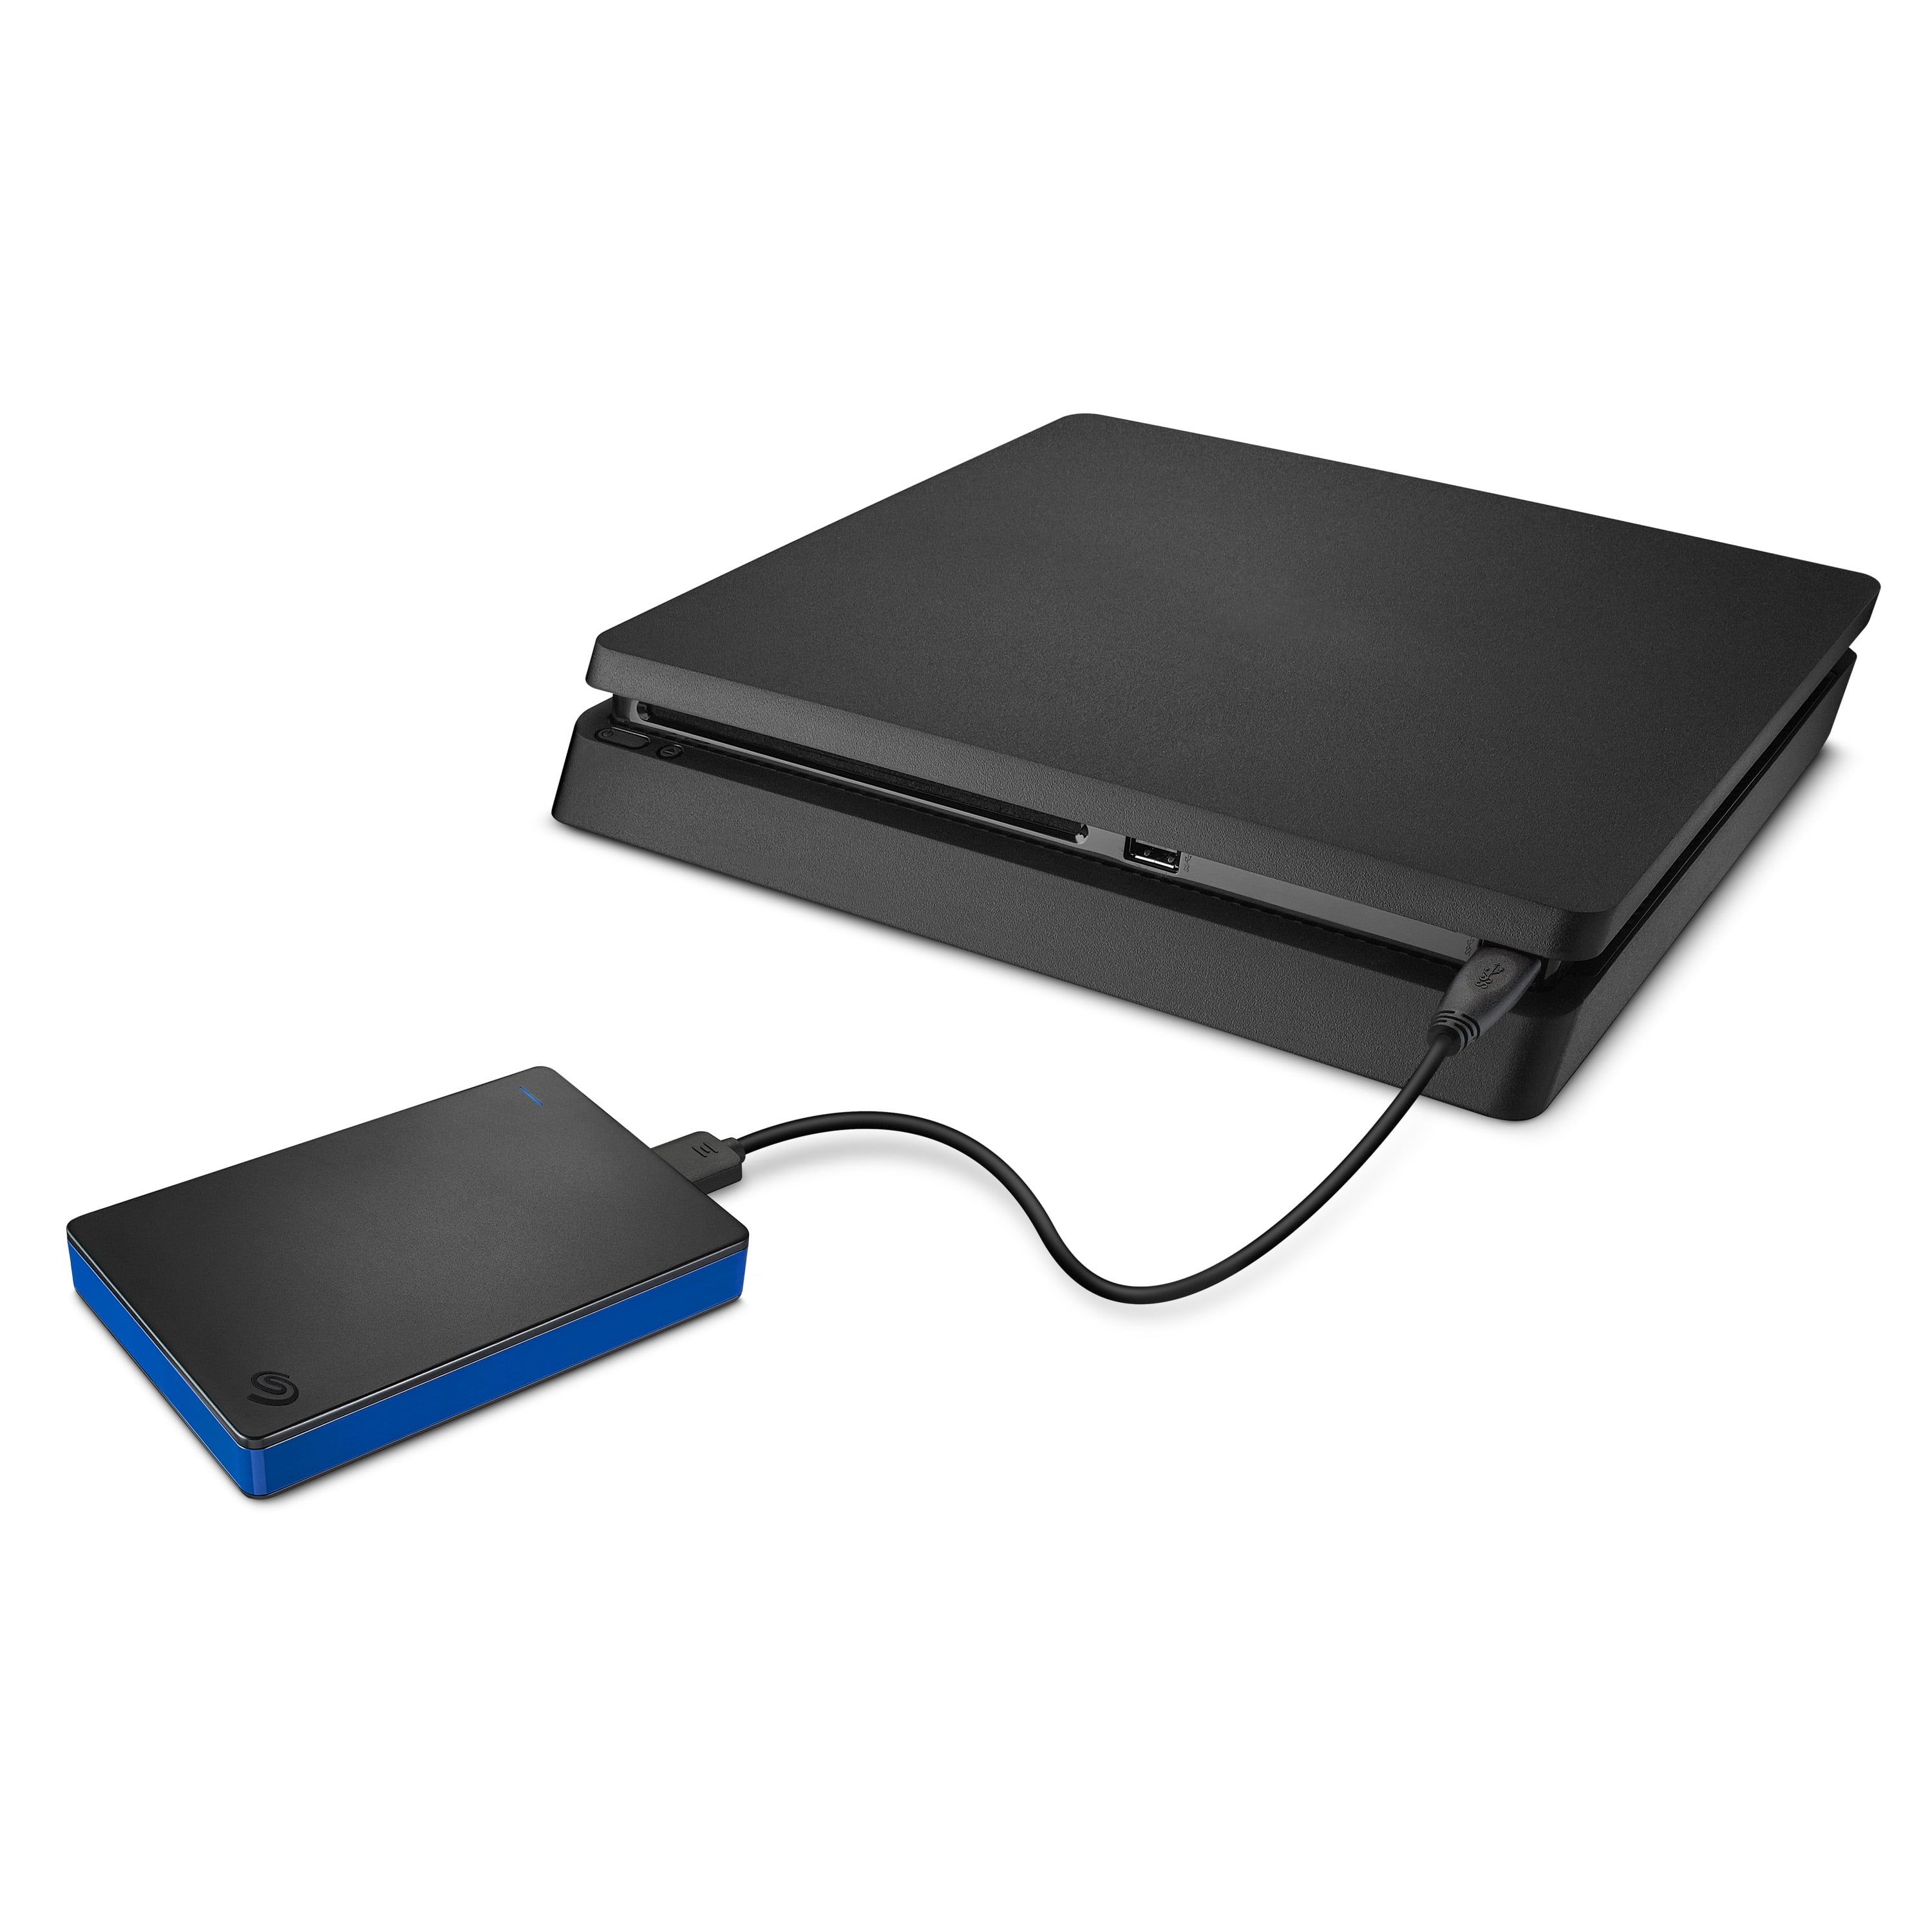 Disque dur externe 4To gaming PS4 Seagate